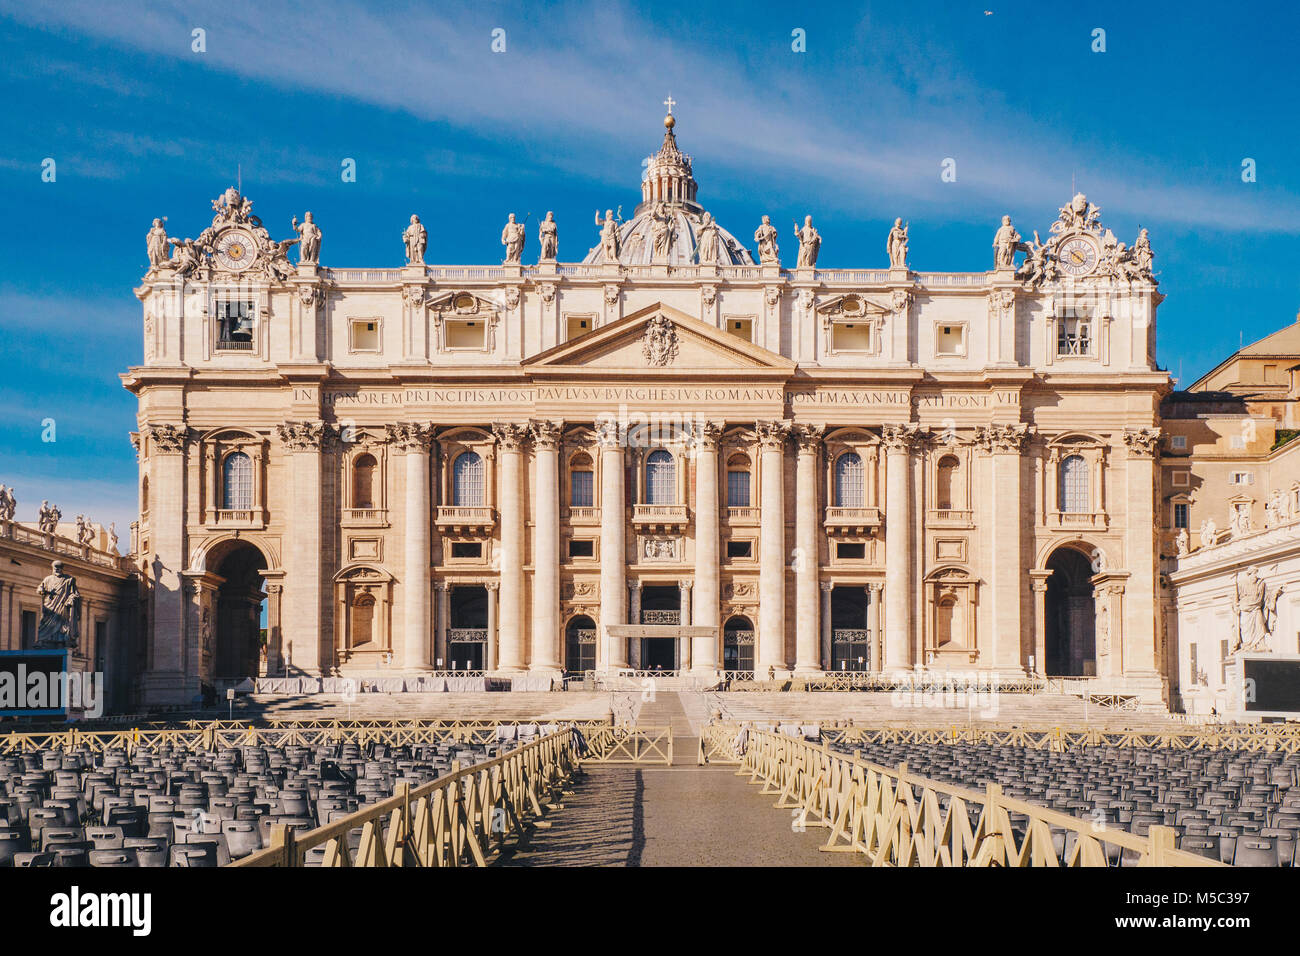 St. Peter's square and Saint Peter's Basilica in the Vatican City in Rome, Italy Stock Photo